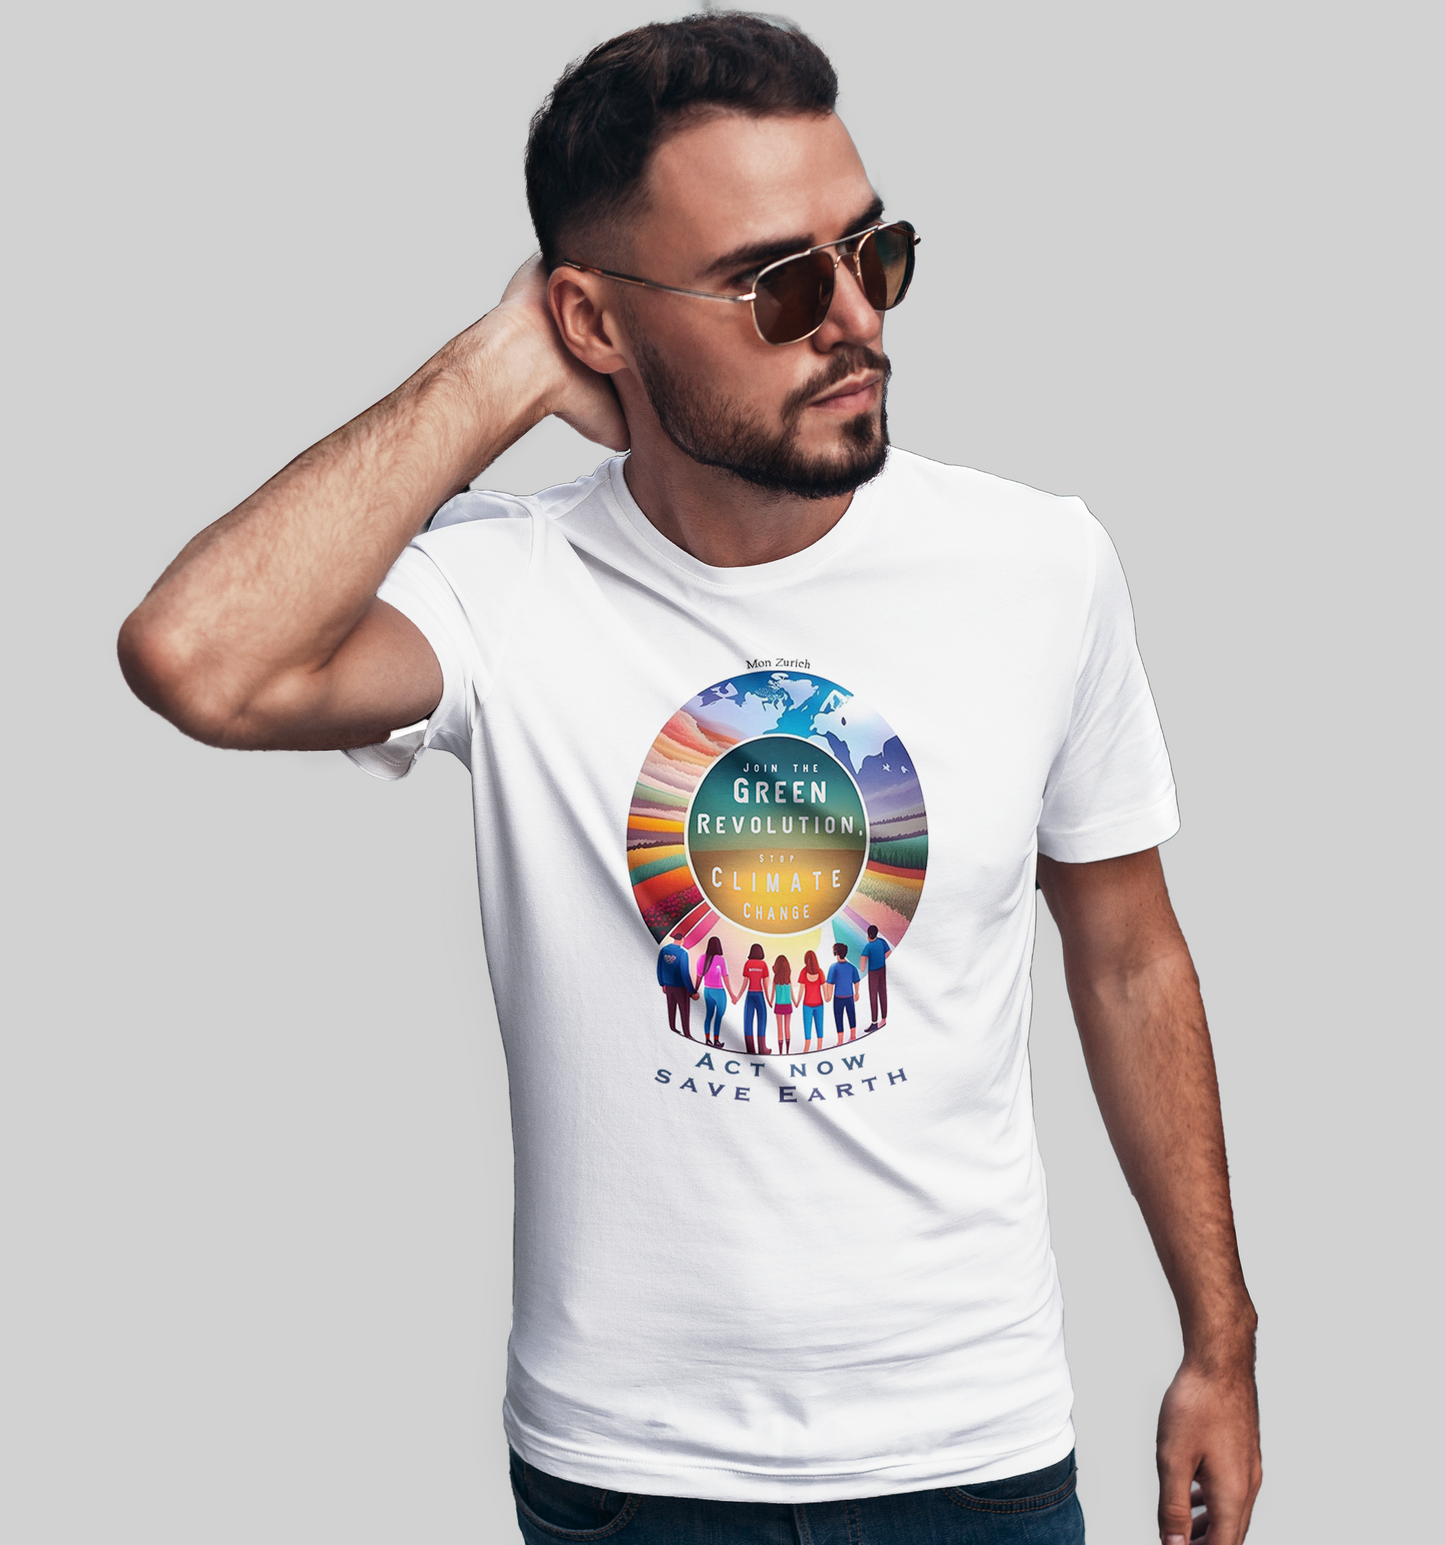 Join the Green Revolution, Stop Climate Change T-shirt in Light - Mon Zurich Originals